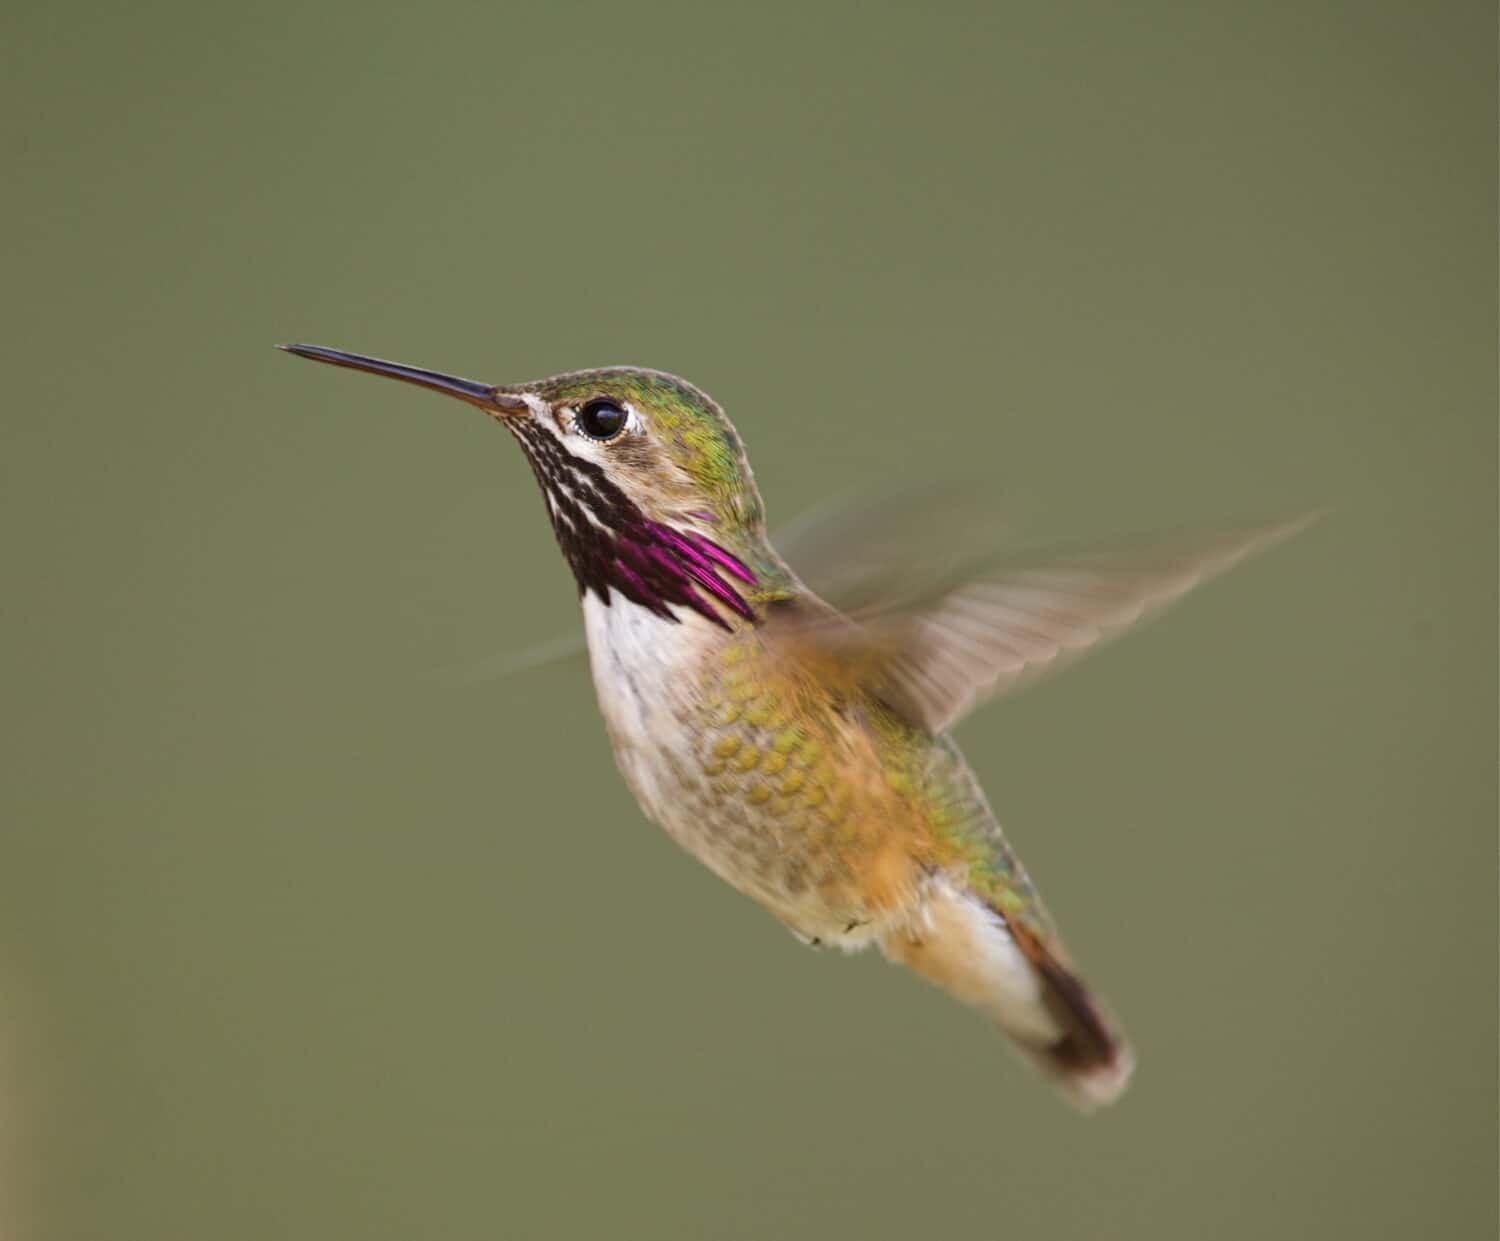 Calliope Hummingbird in flight with purple neck streaking clearly visible; rapidly beating wings exhibit motion blur